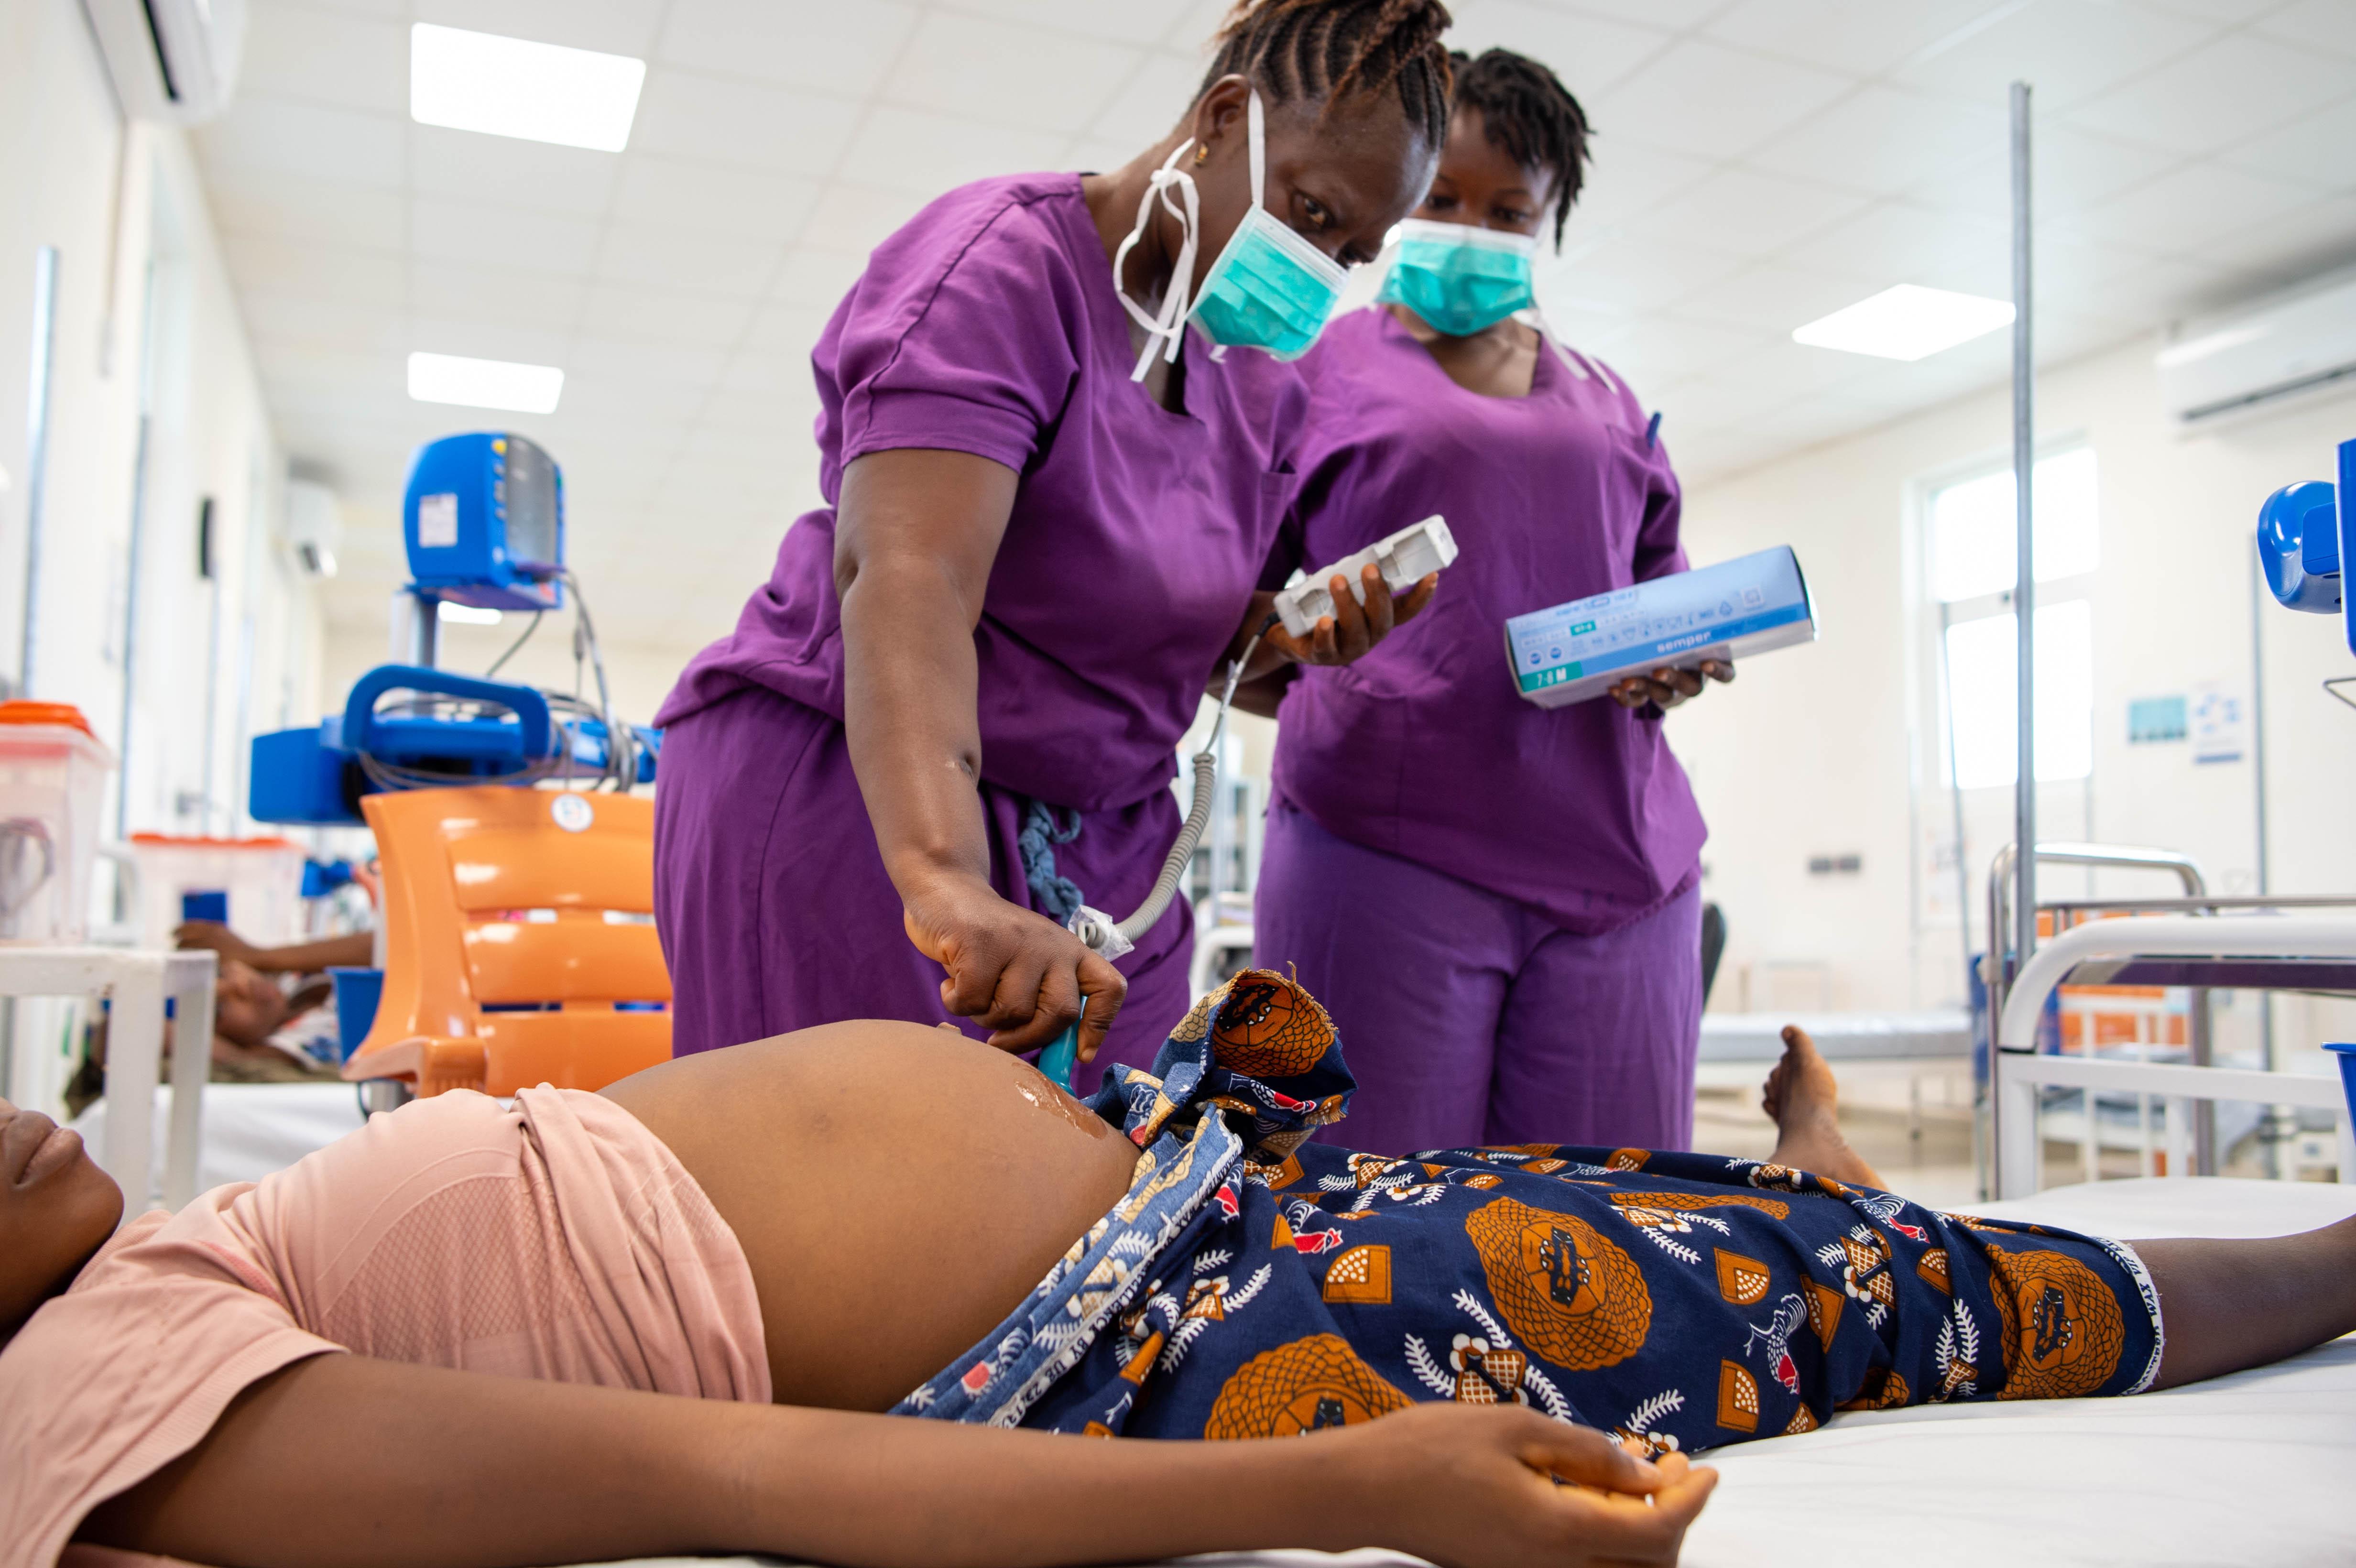 Helping pregnant women reach hospital in time